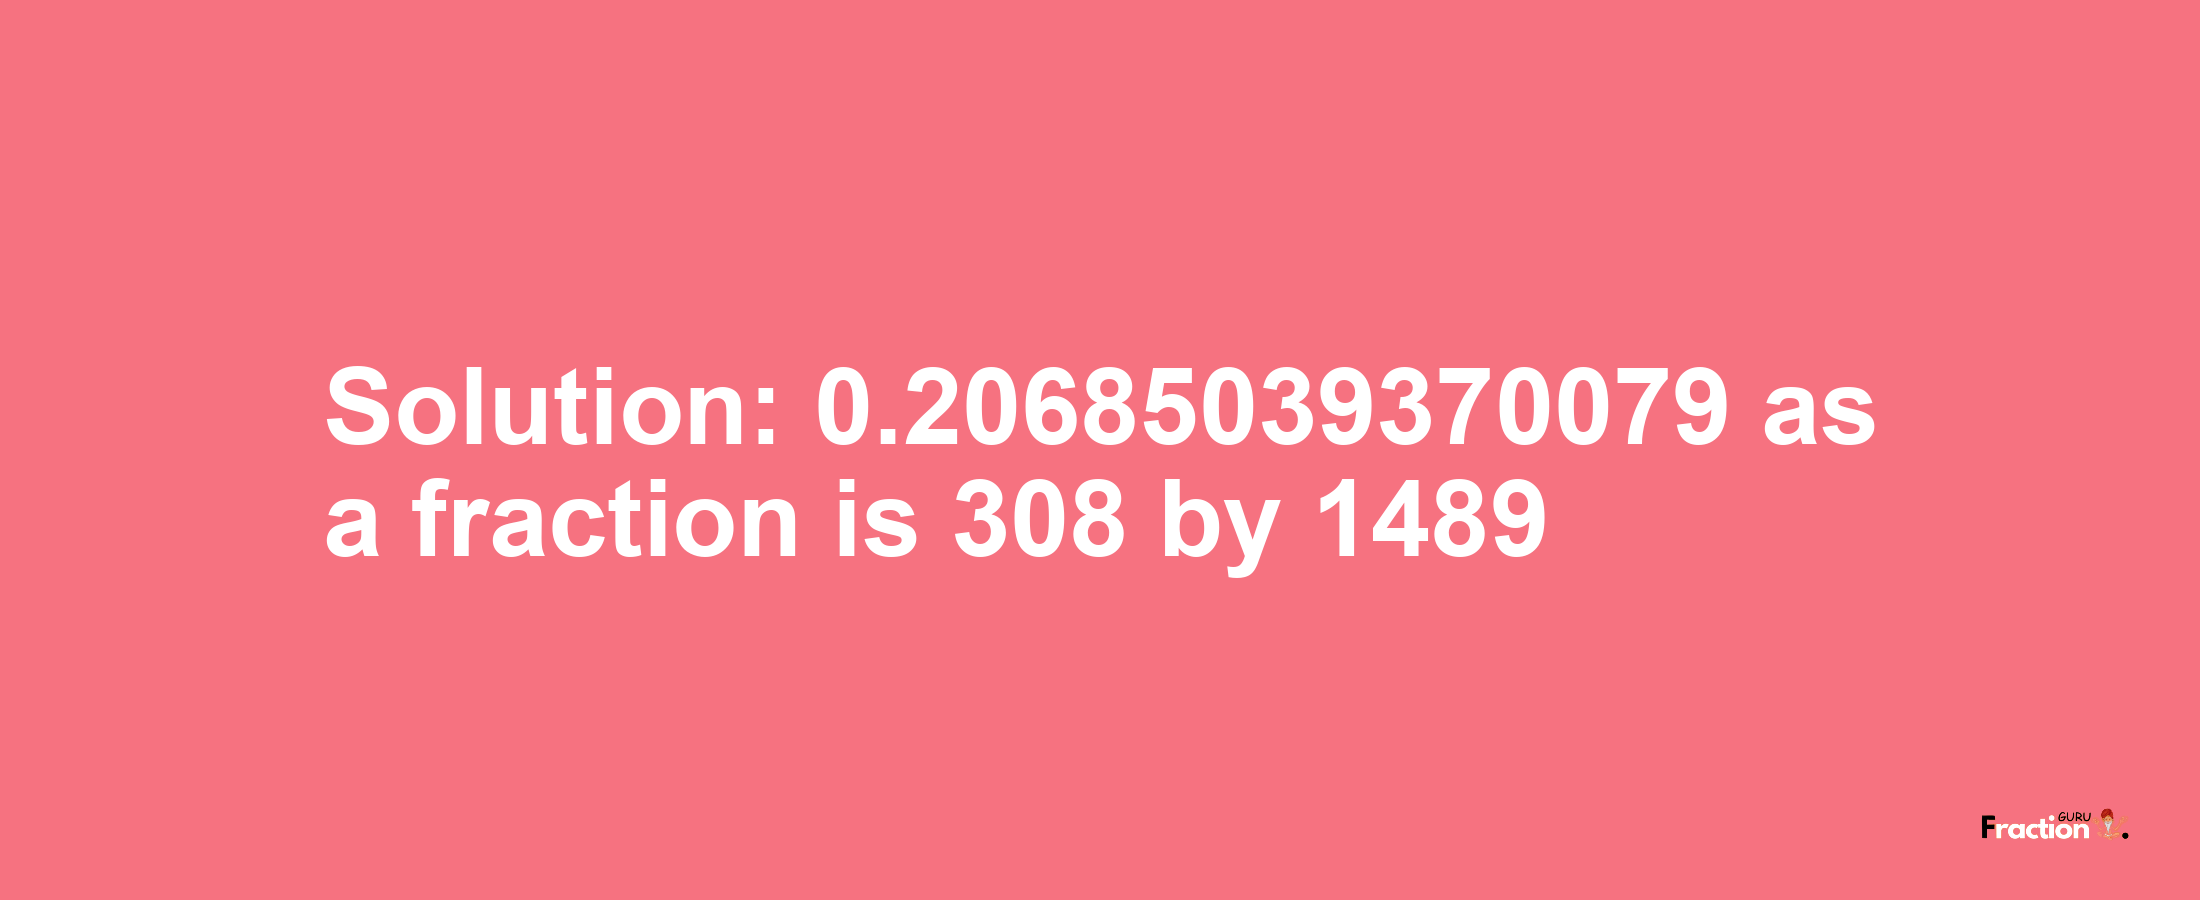 Solution:0.20685039370079 as a fraction is 308/1489